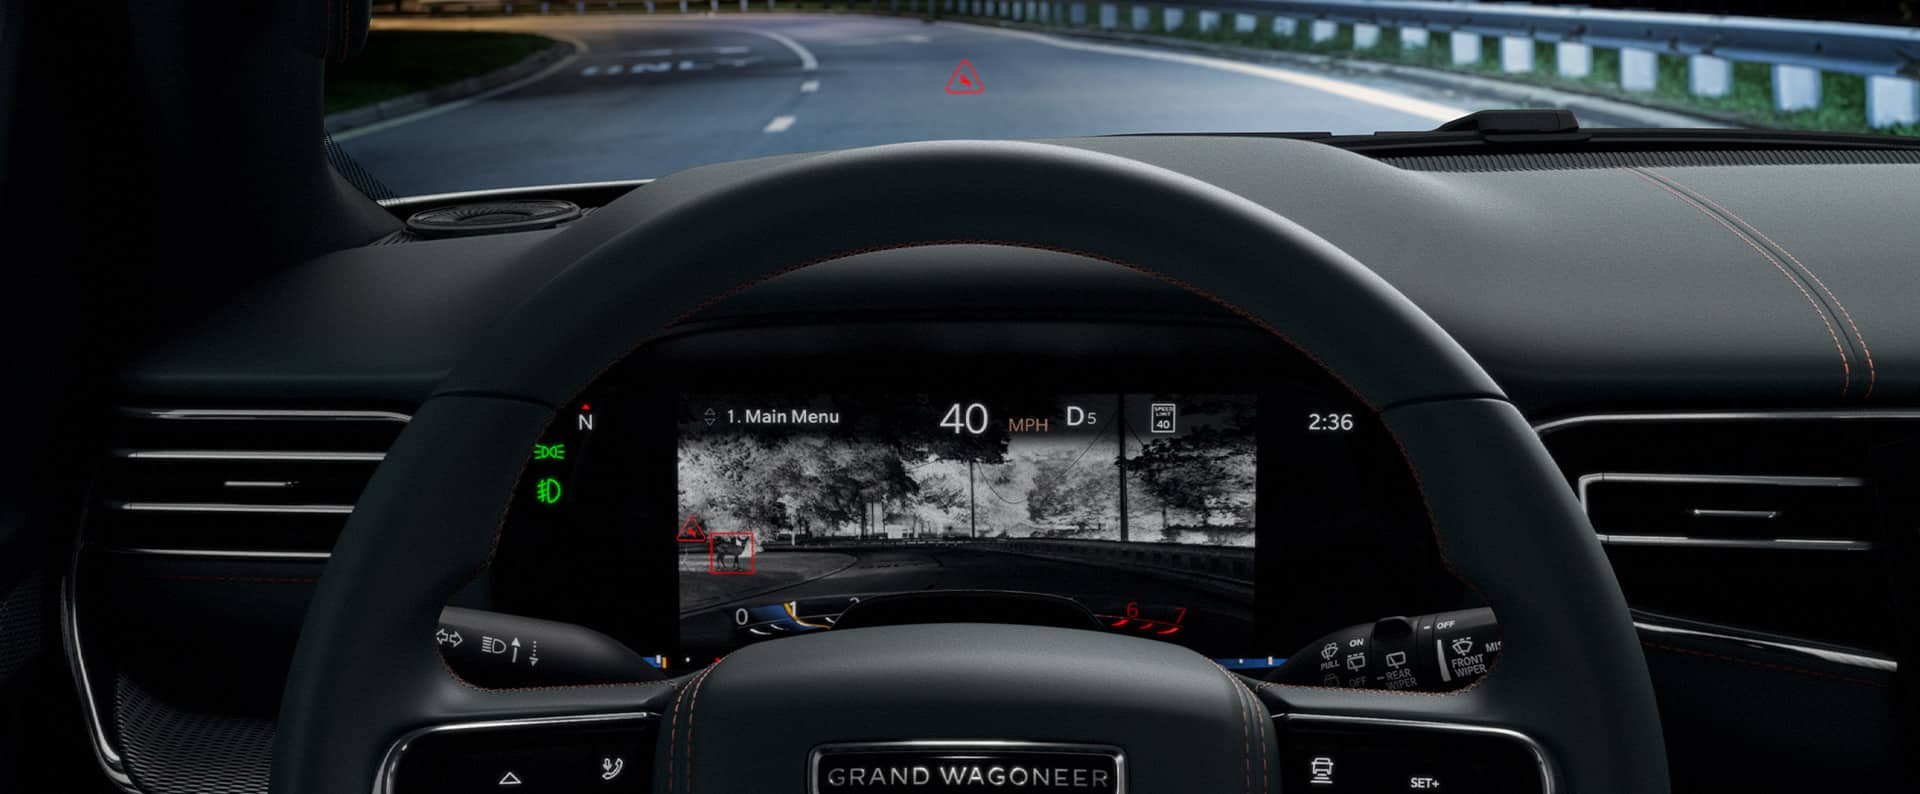 The Driver Information Digital Cluster Display in the 2022 Grand Wagoneer showing the view from the night vision camera with a warning about an approaching animal.